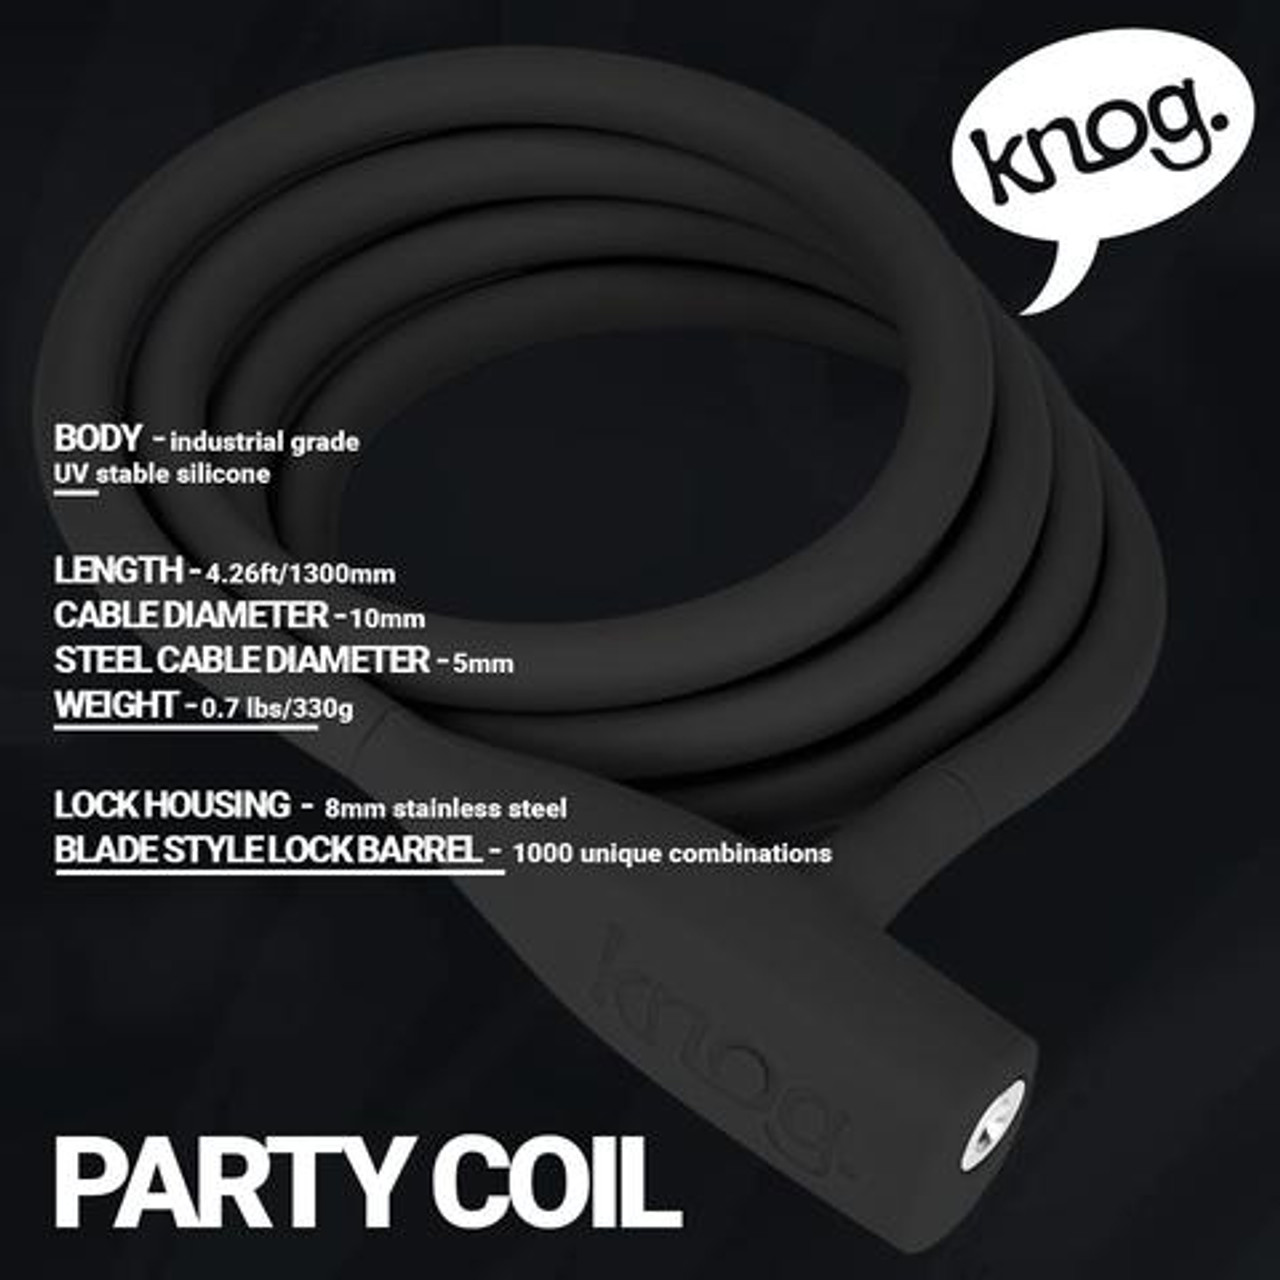 Party Coil Key Lock, By KNOG